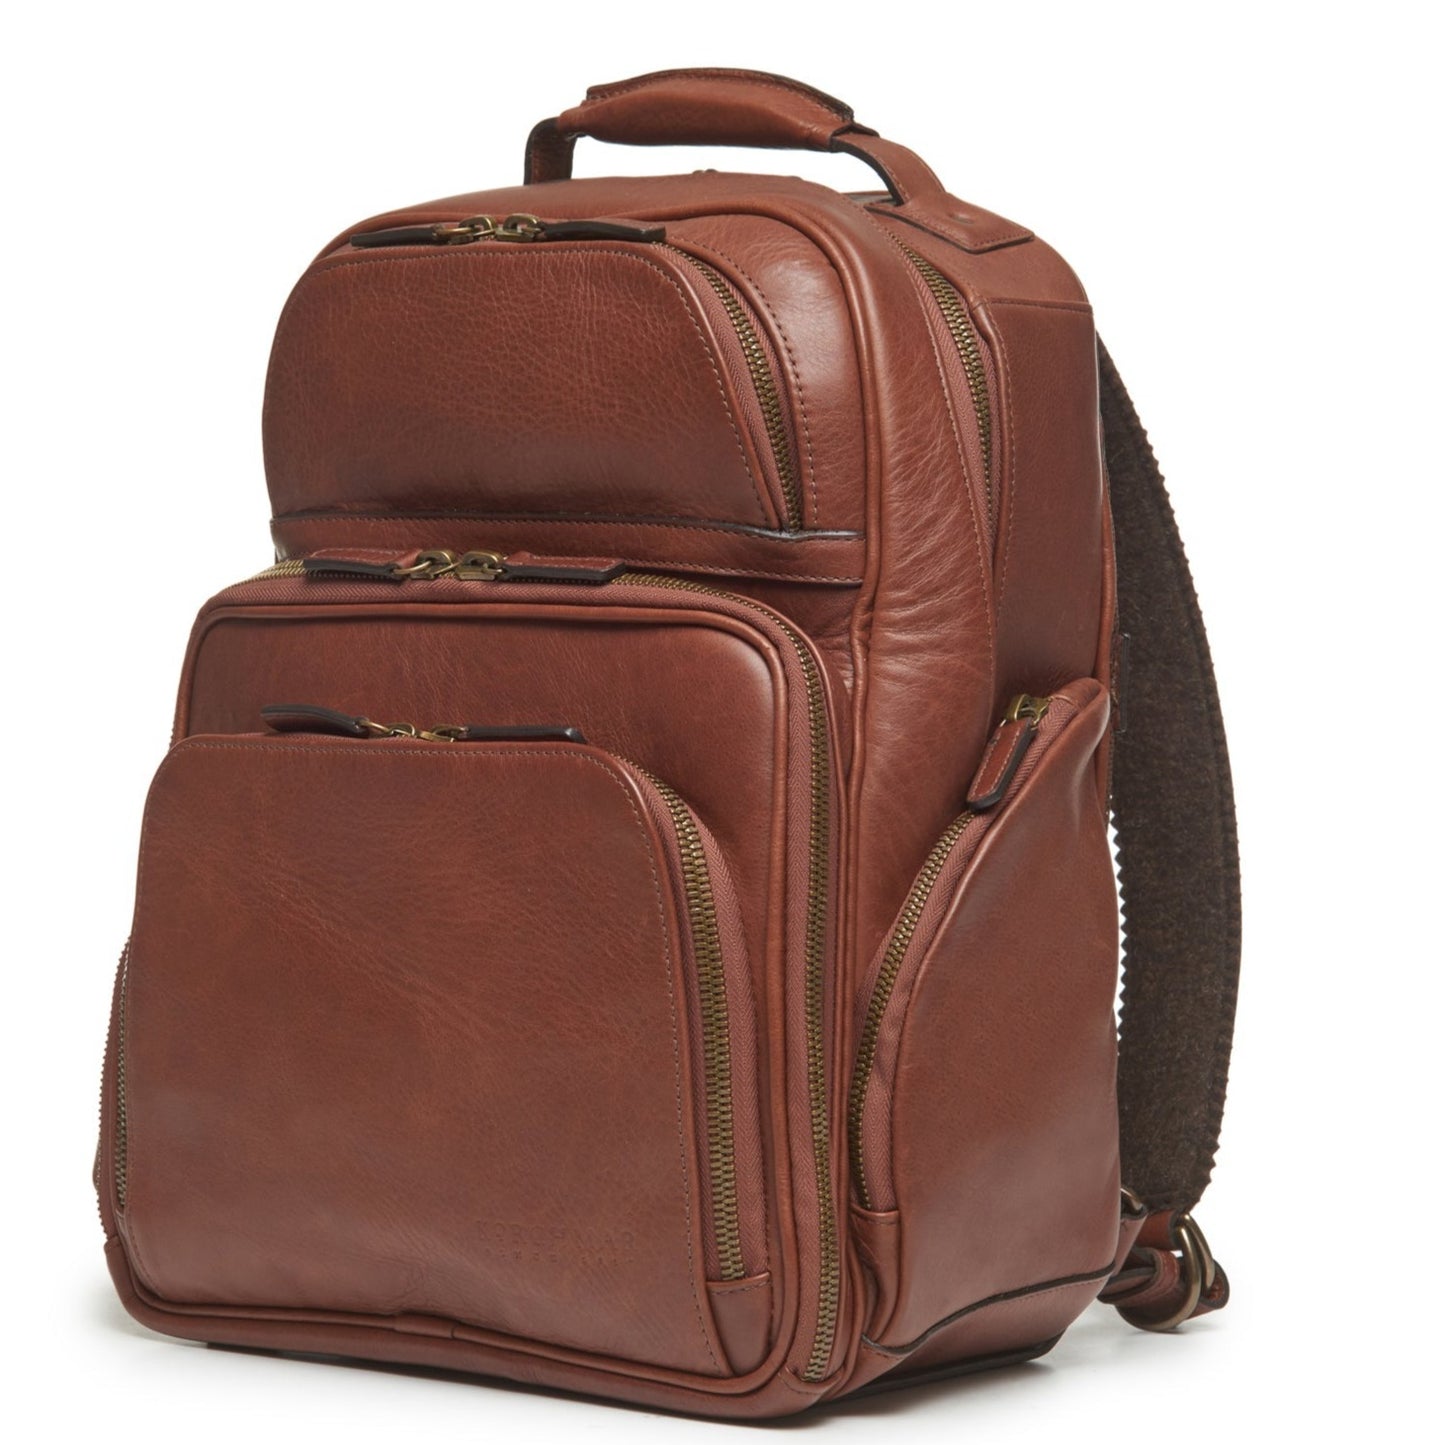 Mason Chocolate Brown Leather Leather Backpack | Chocolate Brown Leather Backpack  | Made in USA | Korchmar